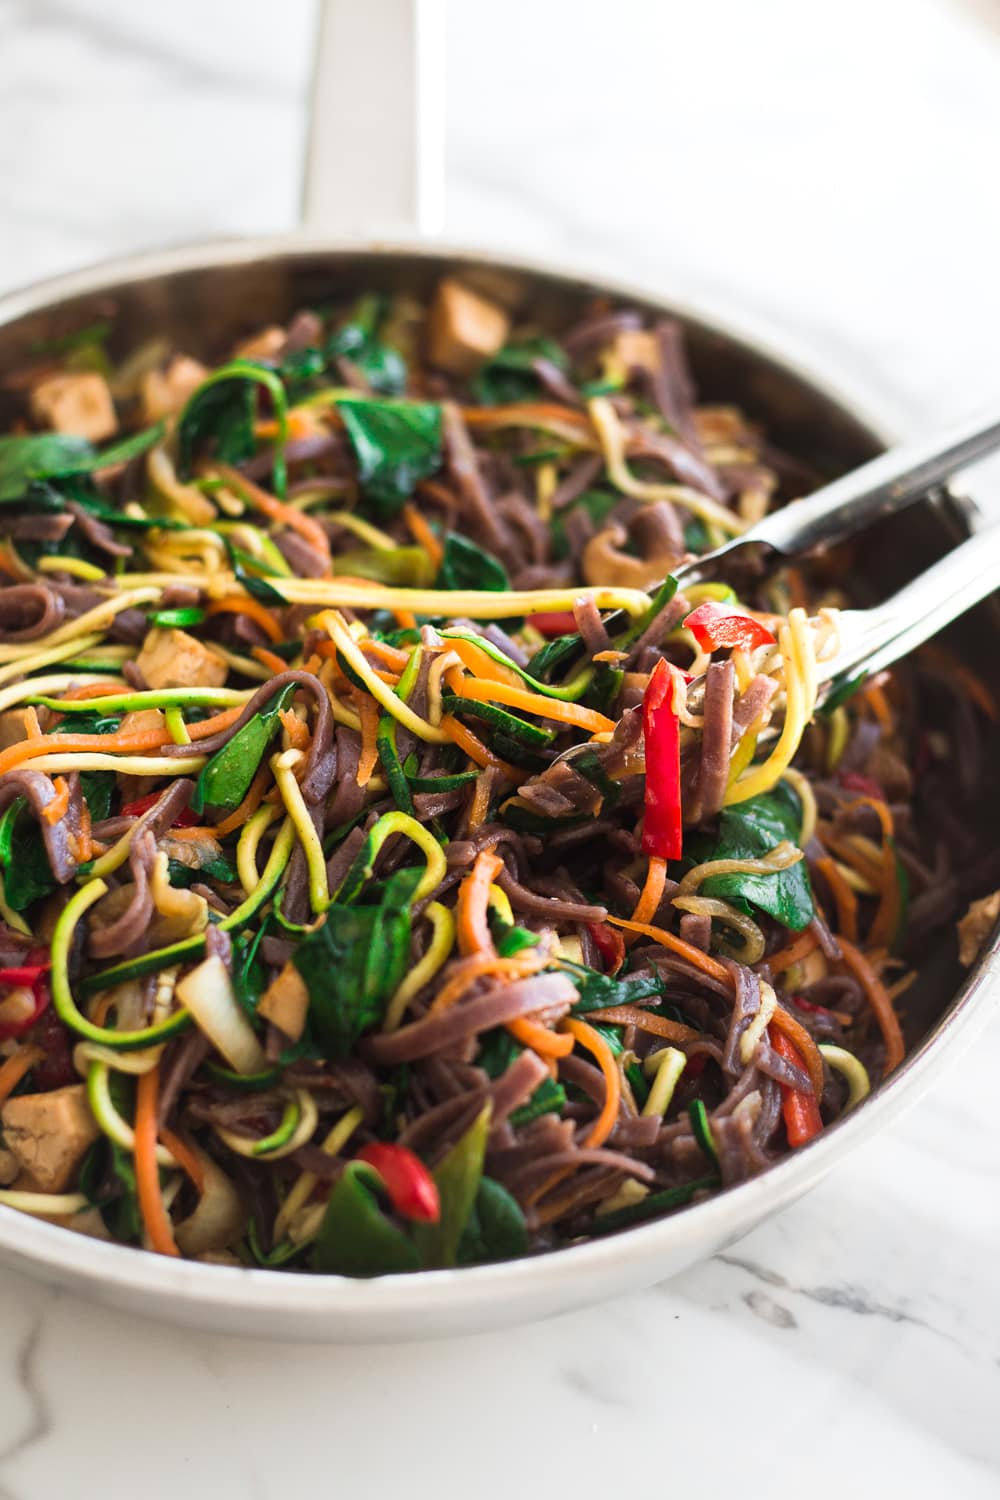 Healthy Vegan Korean Japchae Noodles - A Simple Dish loaded with Vegetables and Zucchini Noodles that is ready in under 30 minutes. #vegan #japchae #korean #noodles #recipe #asian #quick